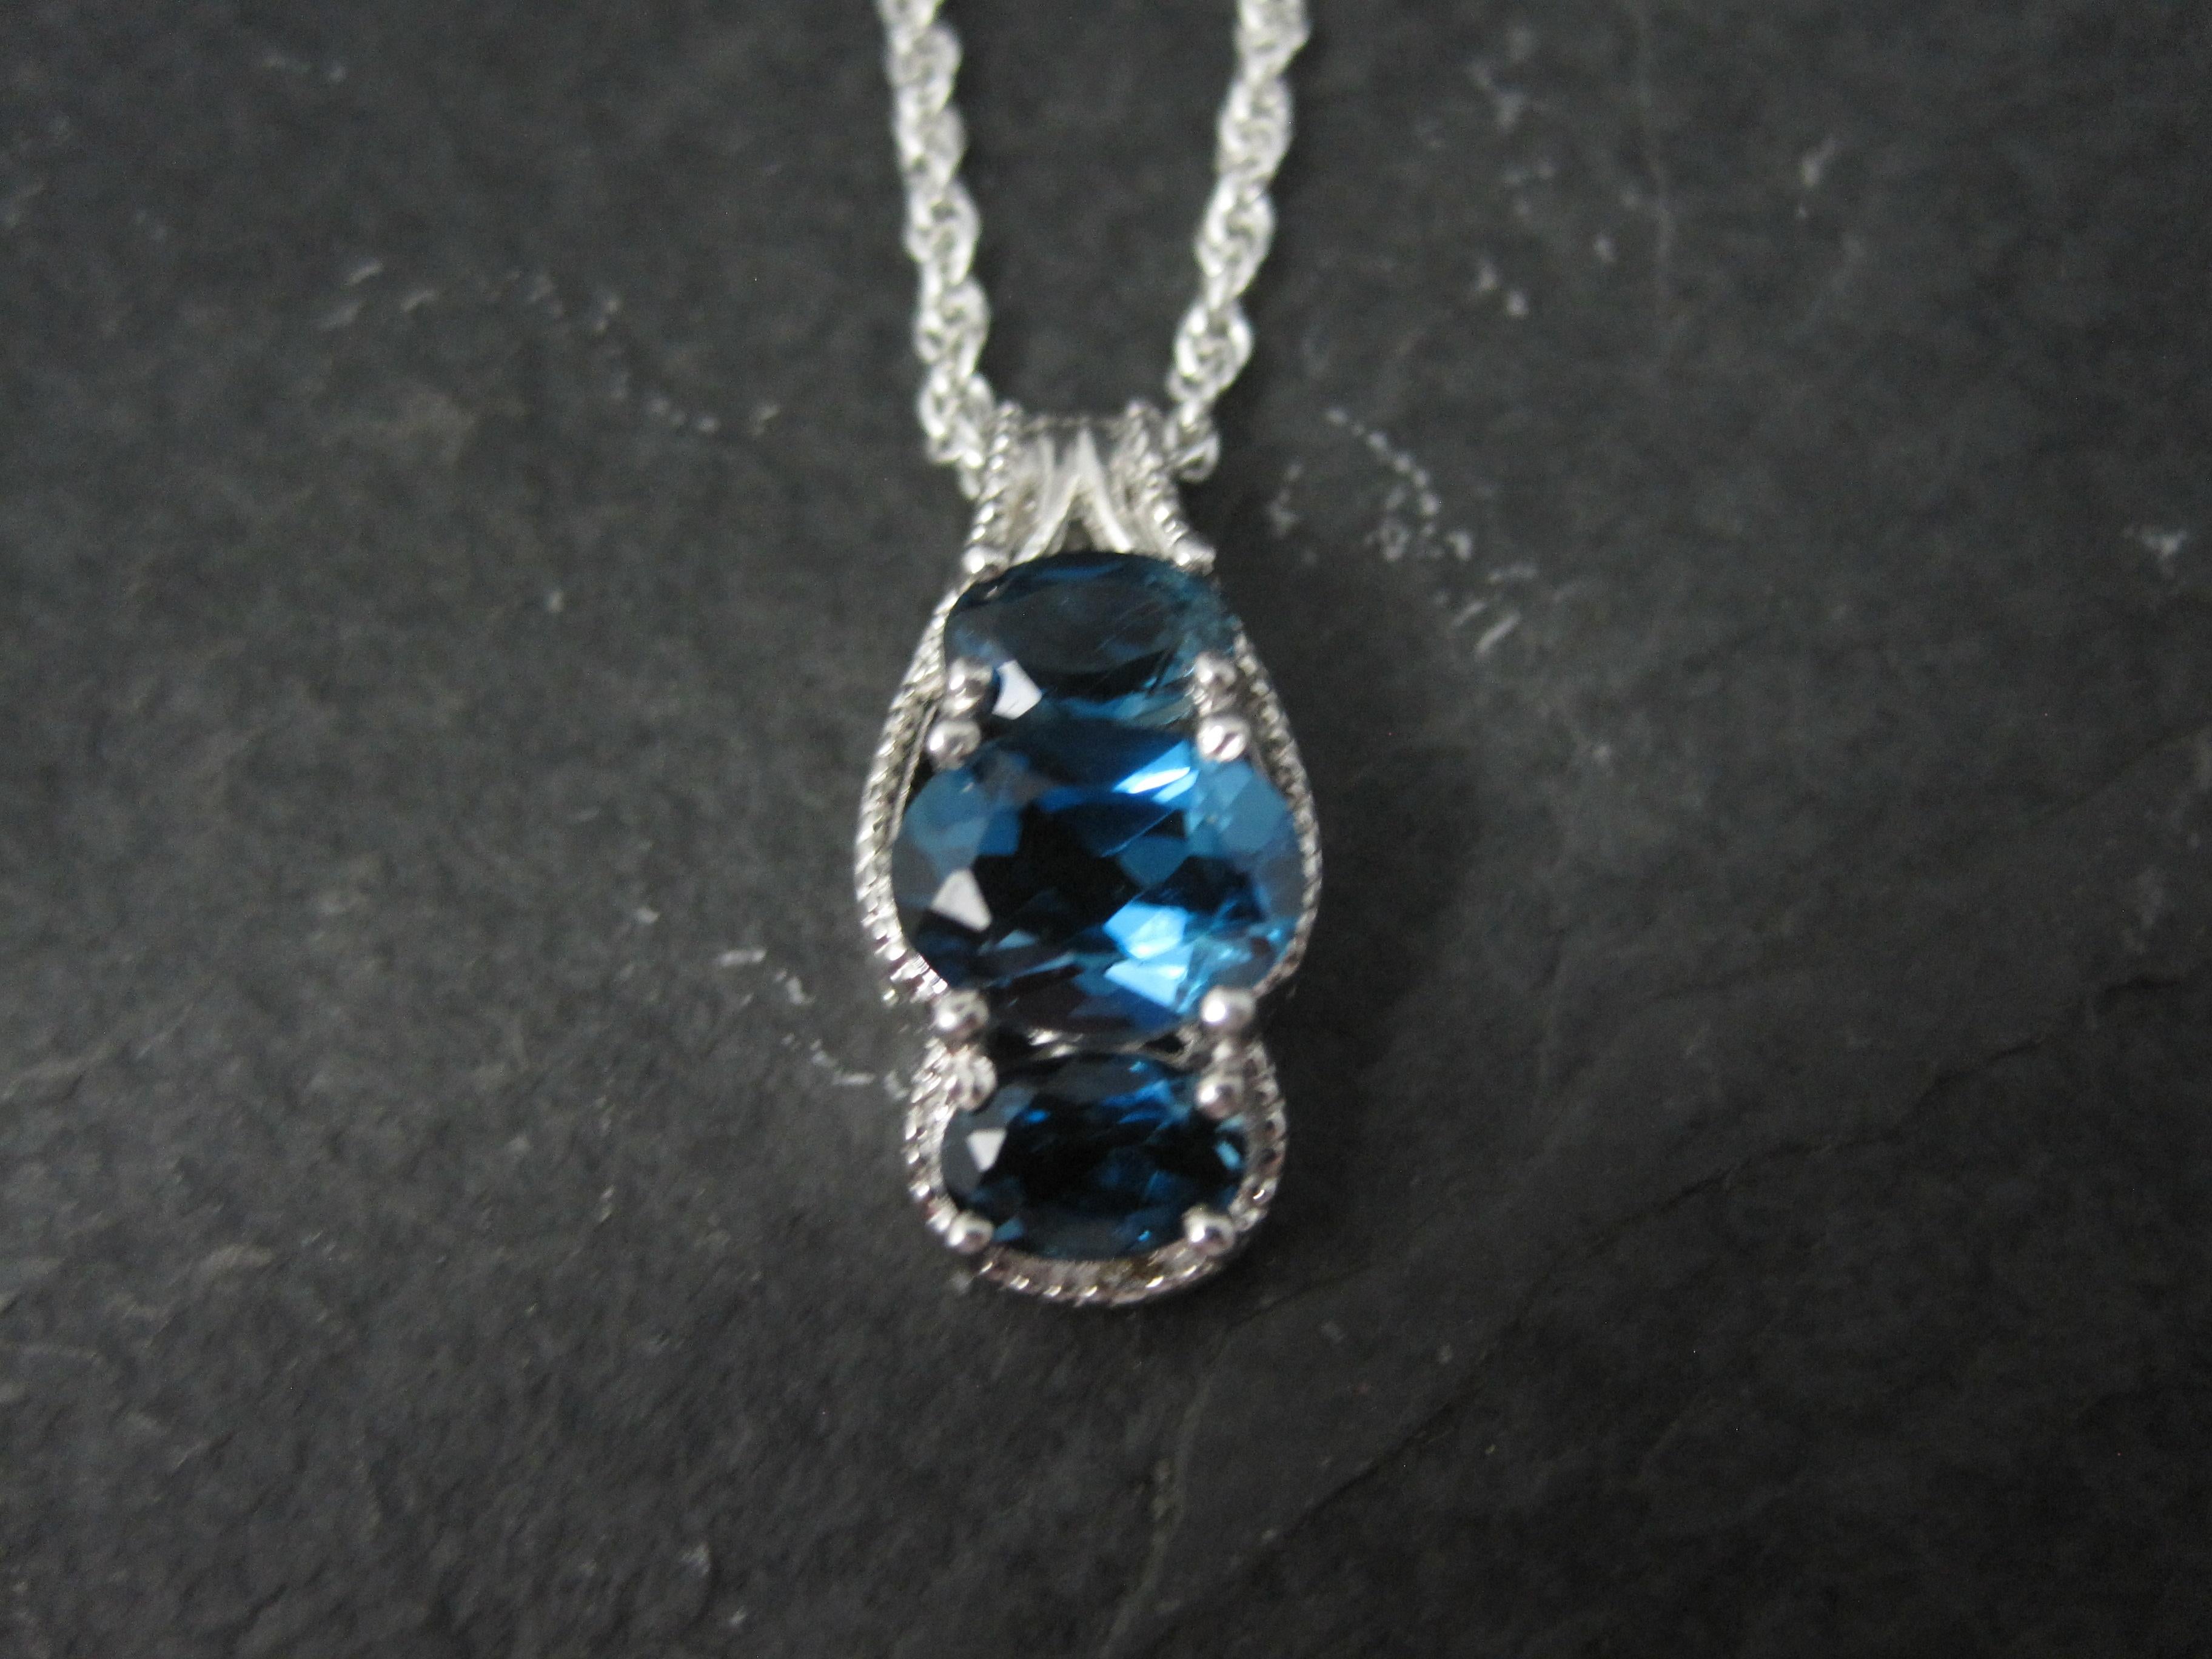 This gorgeous pendant is sterling silver.
It features a 3 stone combination of a 6x8mm and two 4x6mm oval cut, london blue topaz gemstones.

Measurements: 3/8 by 3/4 of an inch
Marks: 925, Chuck Clemency's STS hallmark

Comes on an 18 inch, sterling